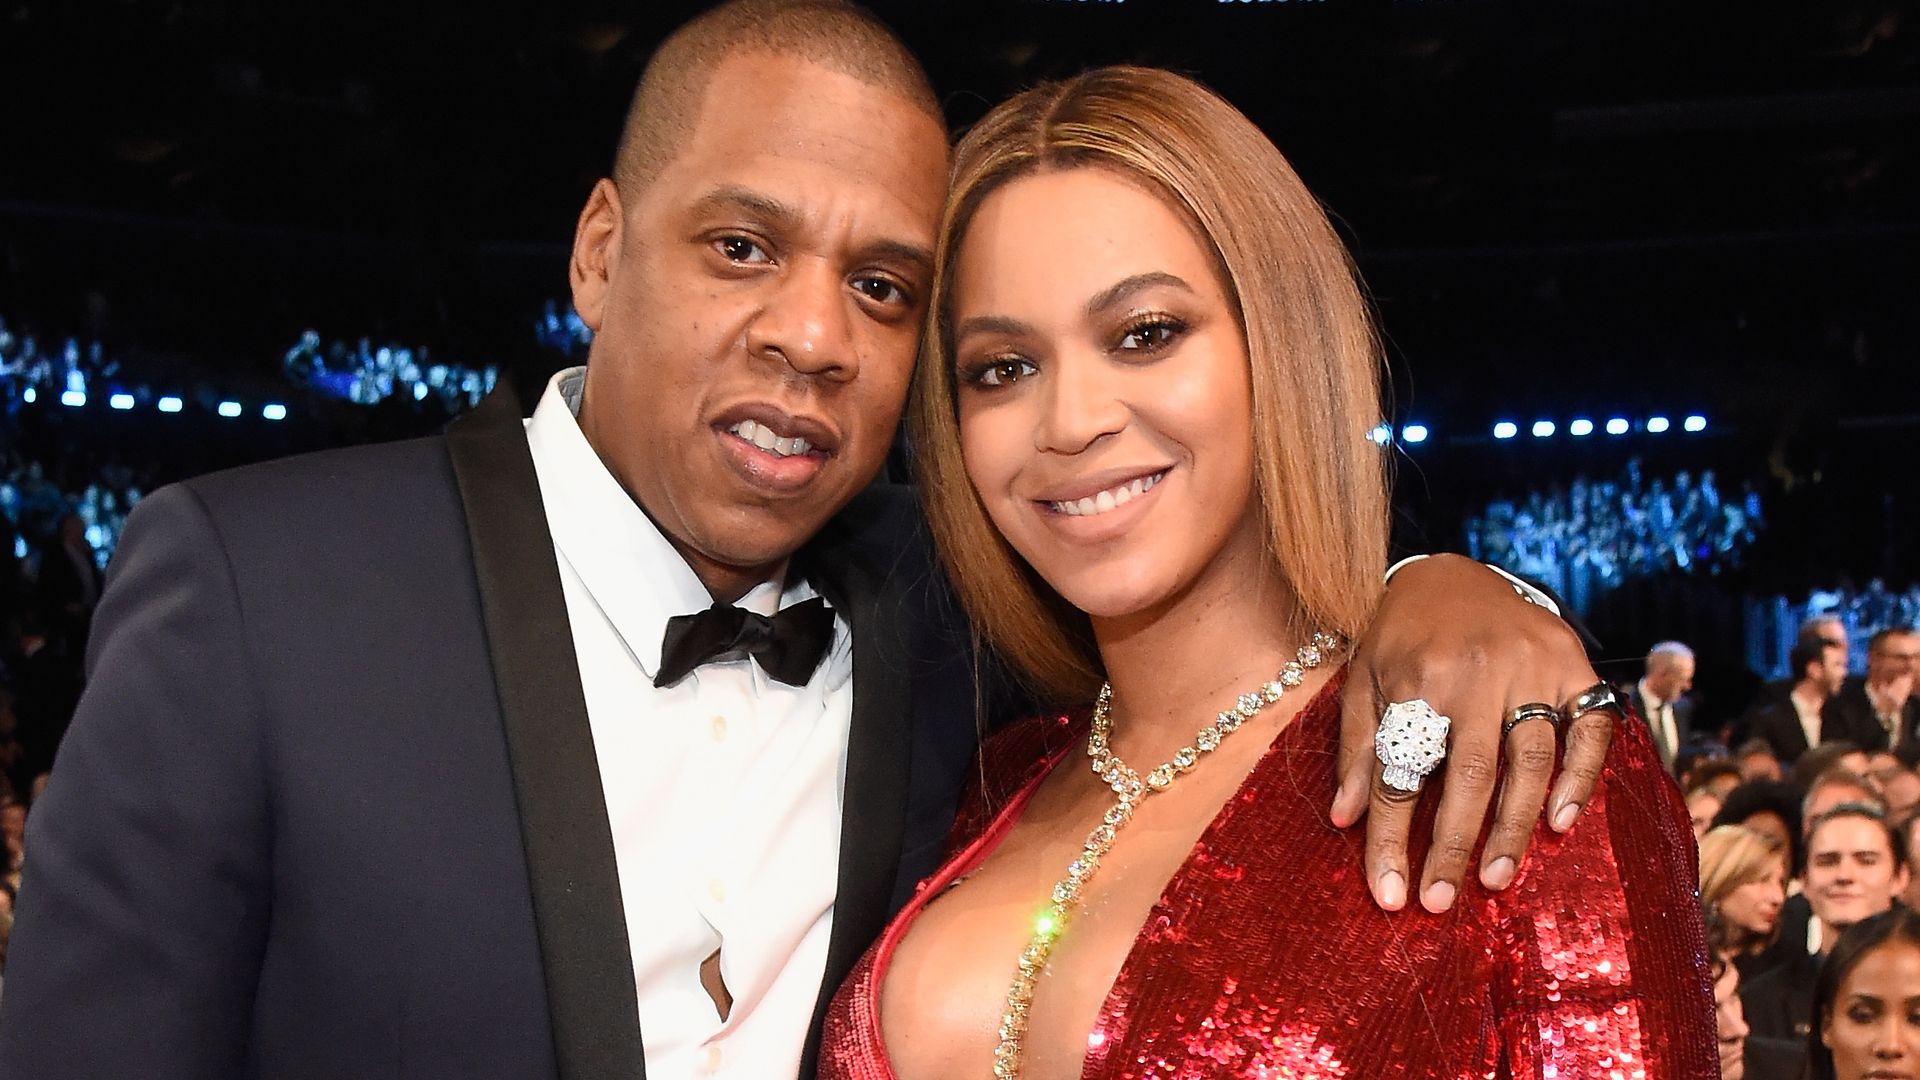 Beyonce and Jay-Z smiling at a fancy event, she is pregnant